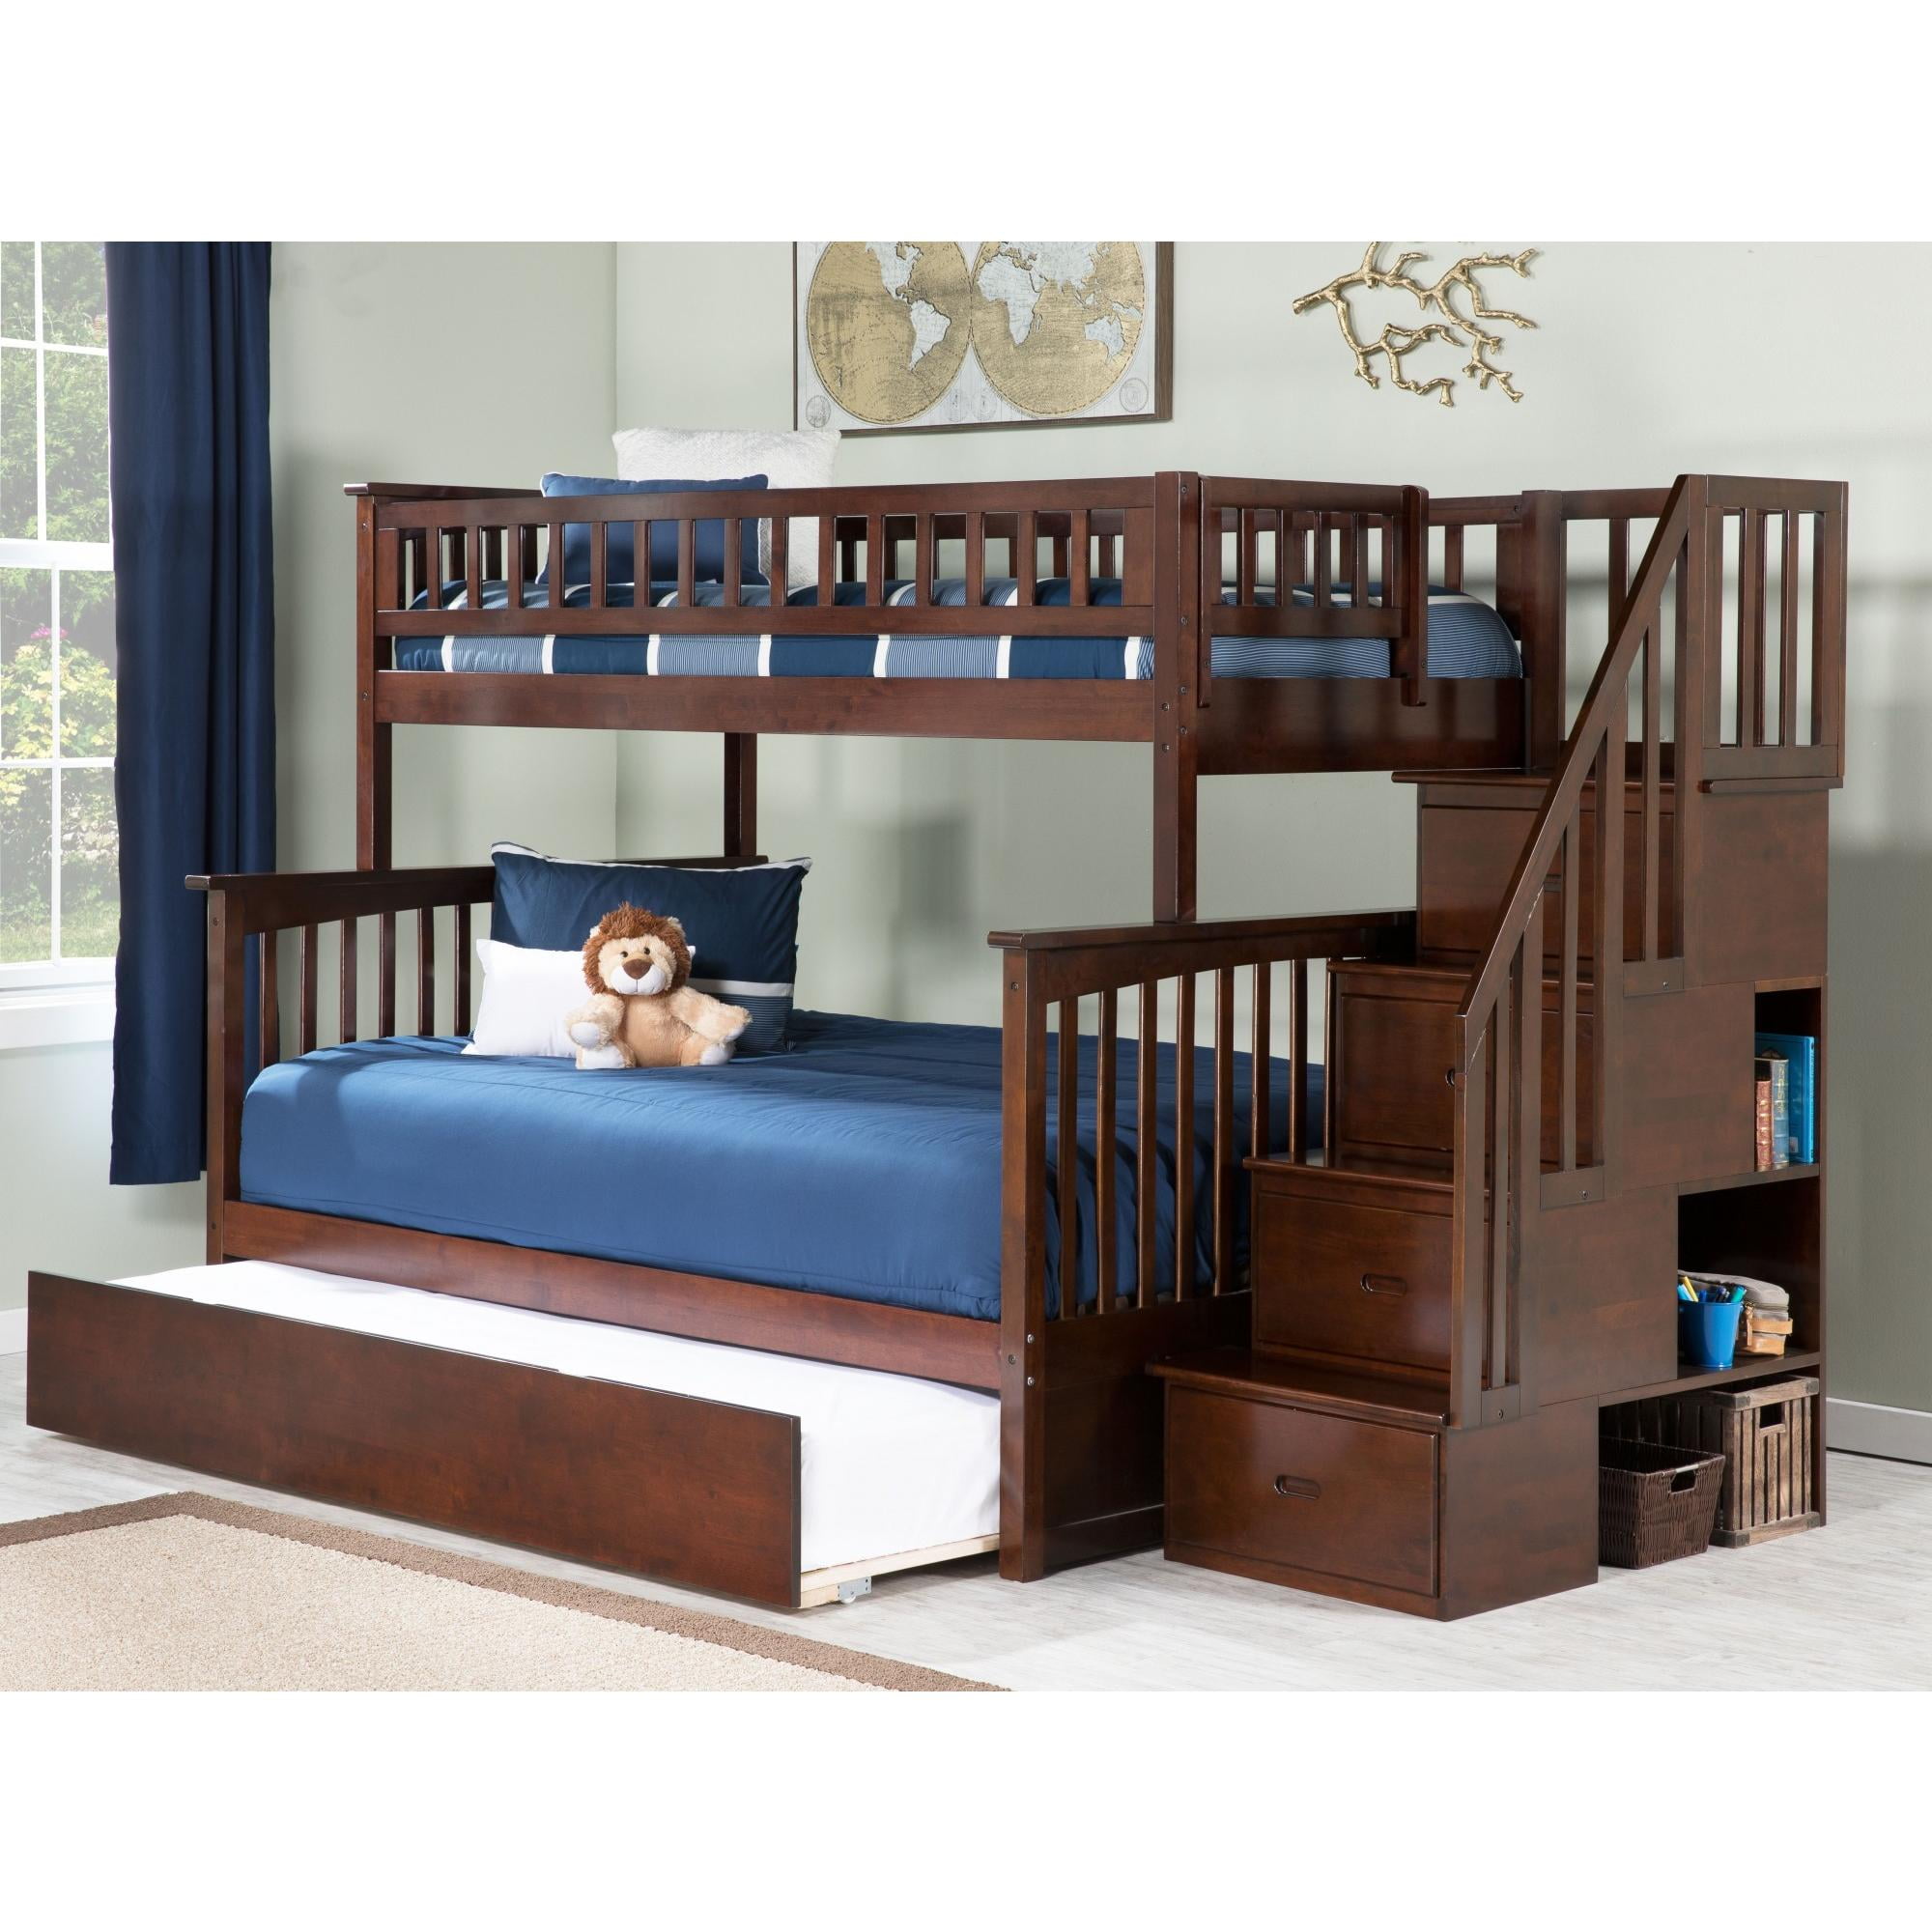 Columbia Staircase Bunk Bed Twin Over, Bunk Beds Built In Stairs